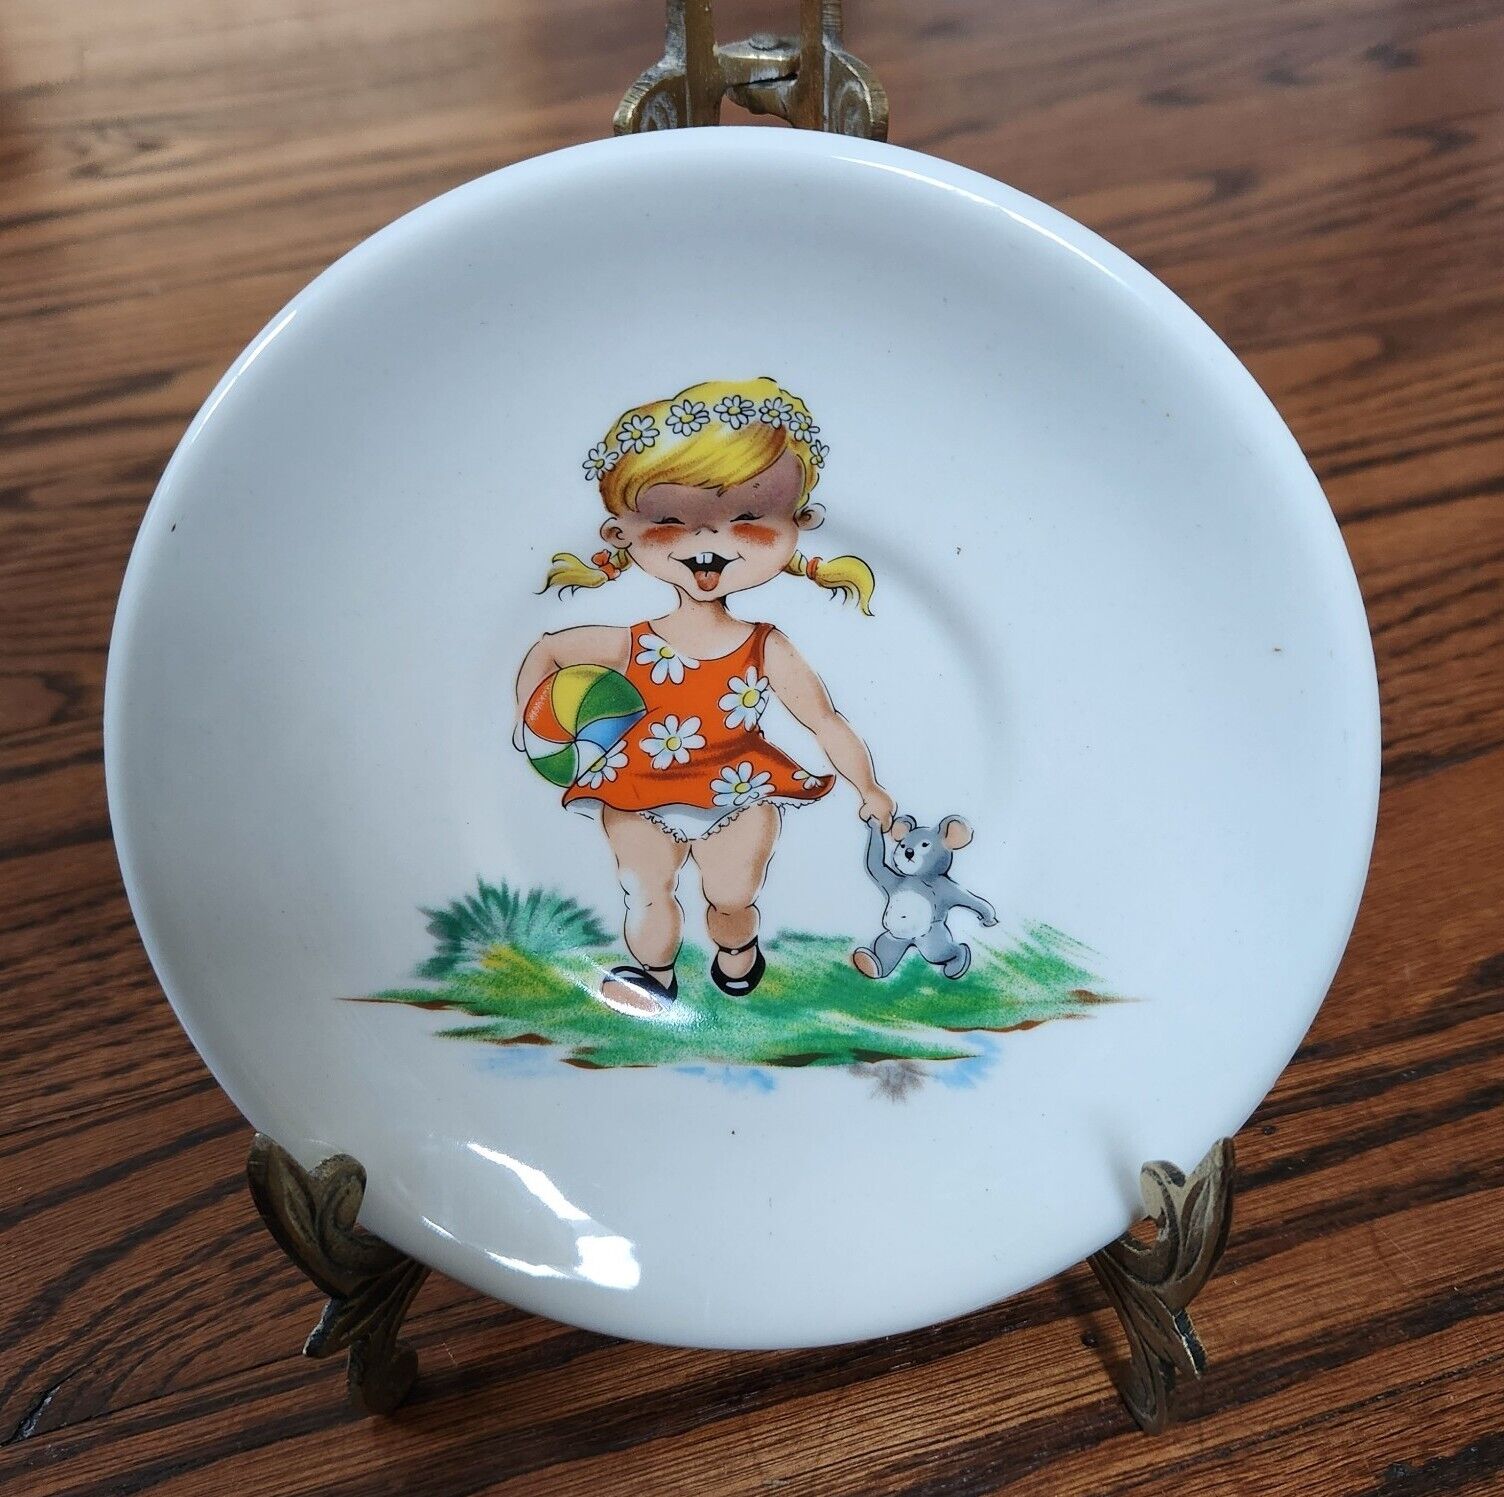 NEW Vintage Corona Royal 100 Anos Porcelain Child\'s Plate / Saucer 1981 Colombia